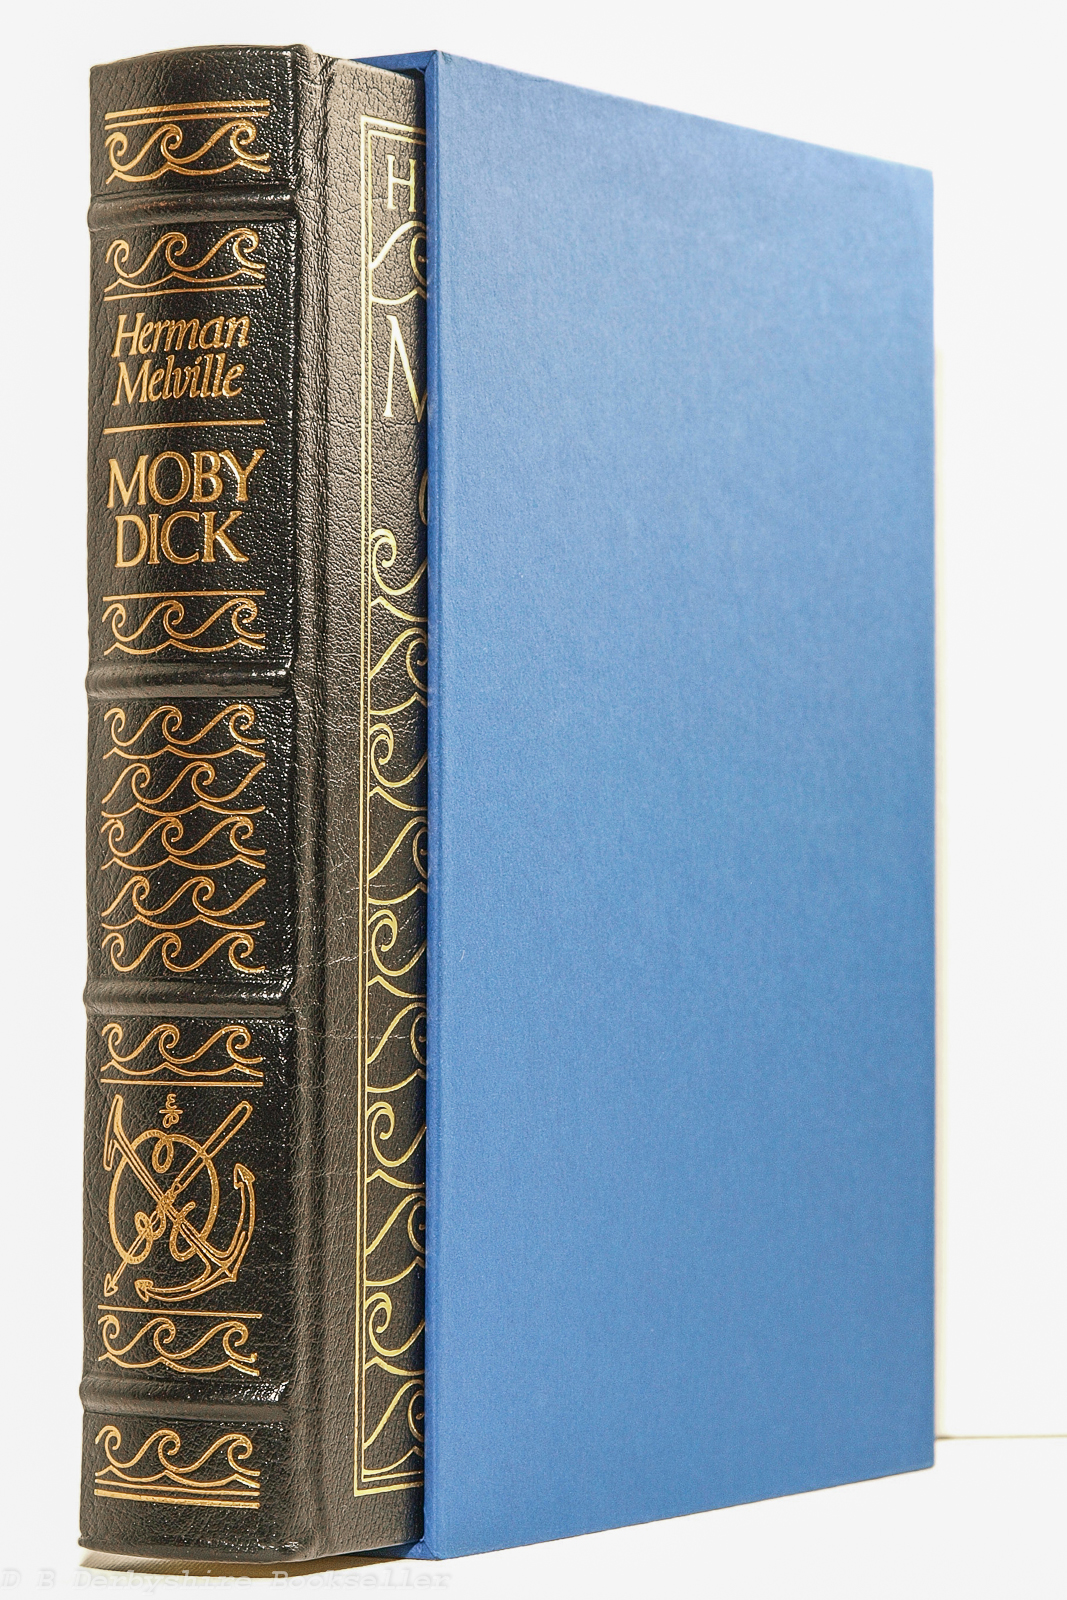 Moby Dick by Herman Melville (Easton Press, 1977) Decorative Leather Binding in Slipcase